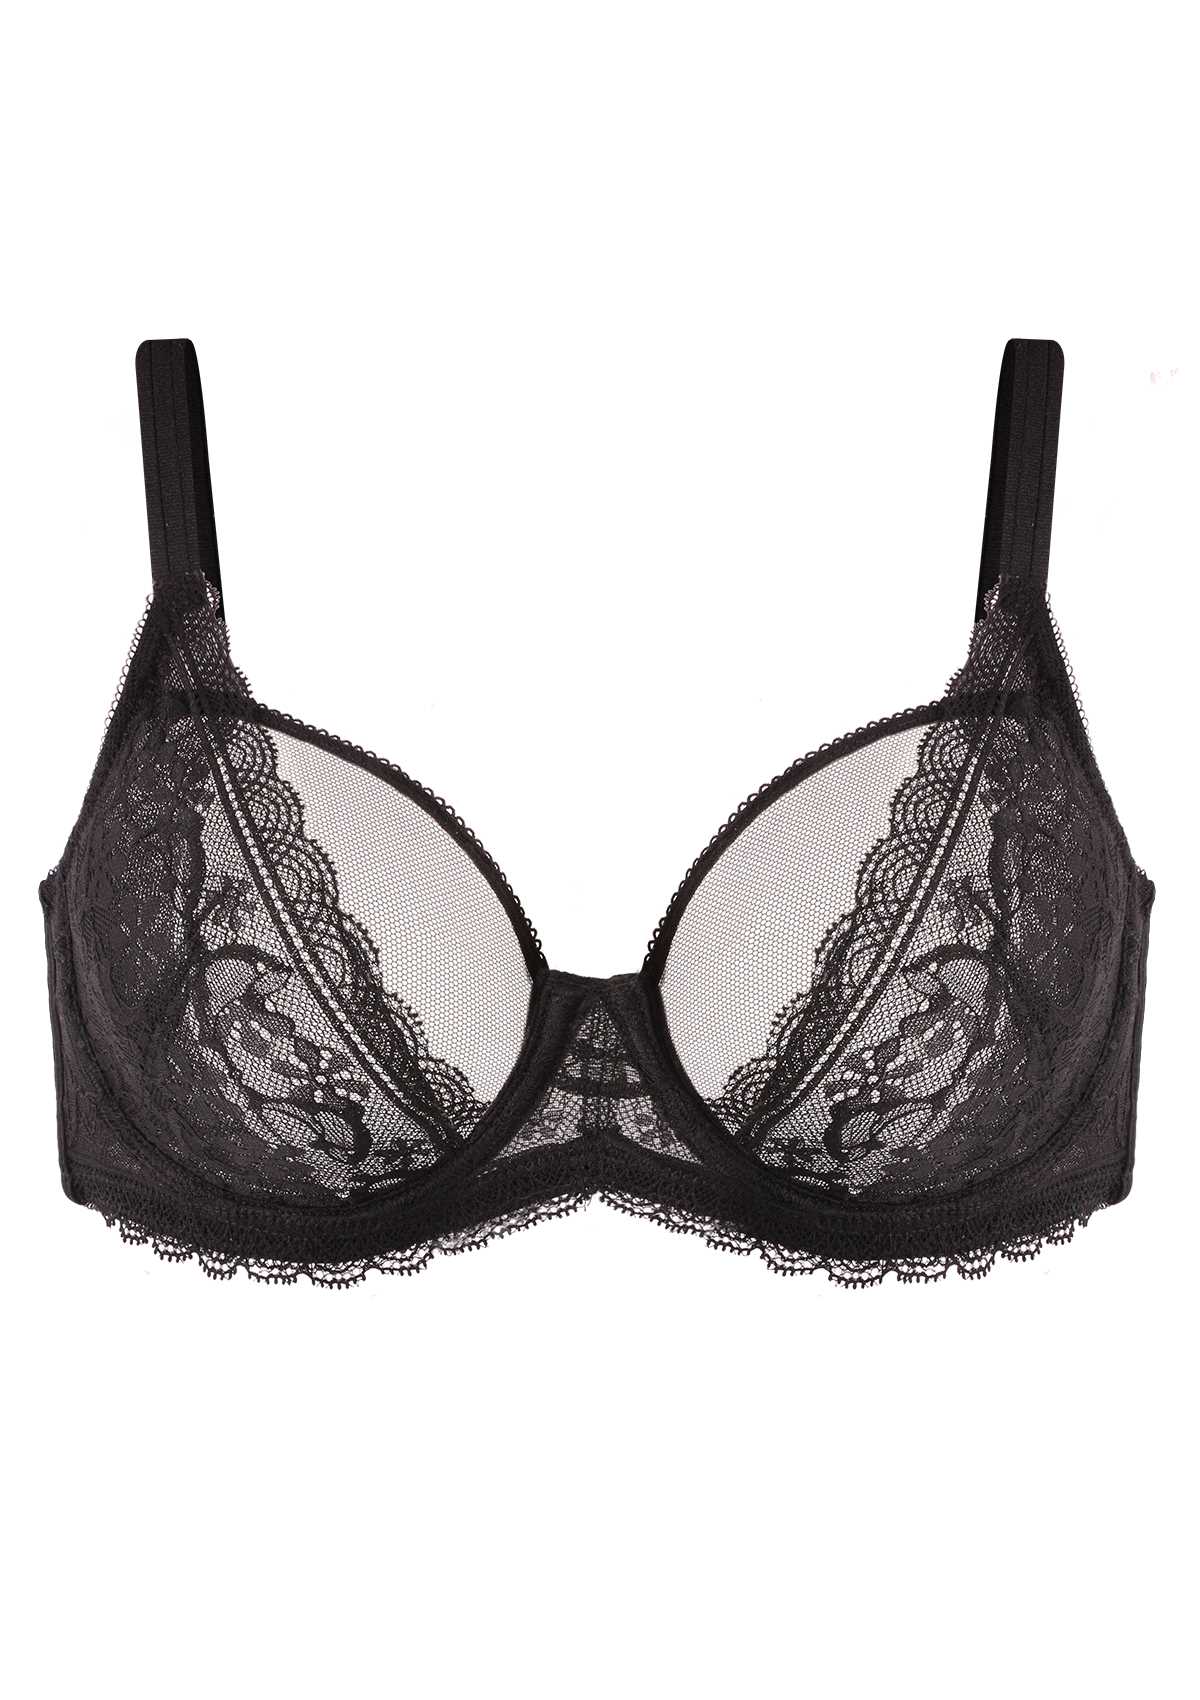 HSIA Anemone Lace Bra And Panties: Back Support Wired Bra - Black / 38 / C